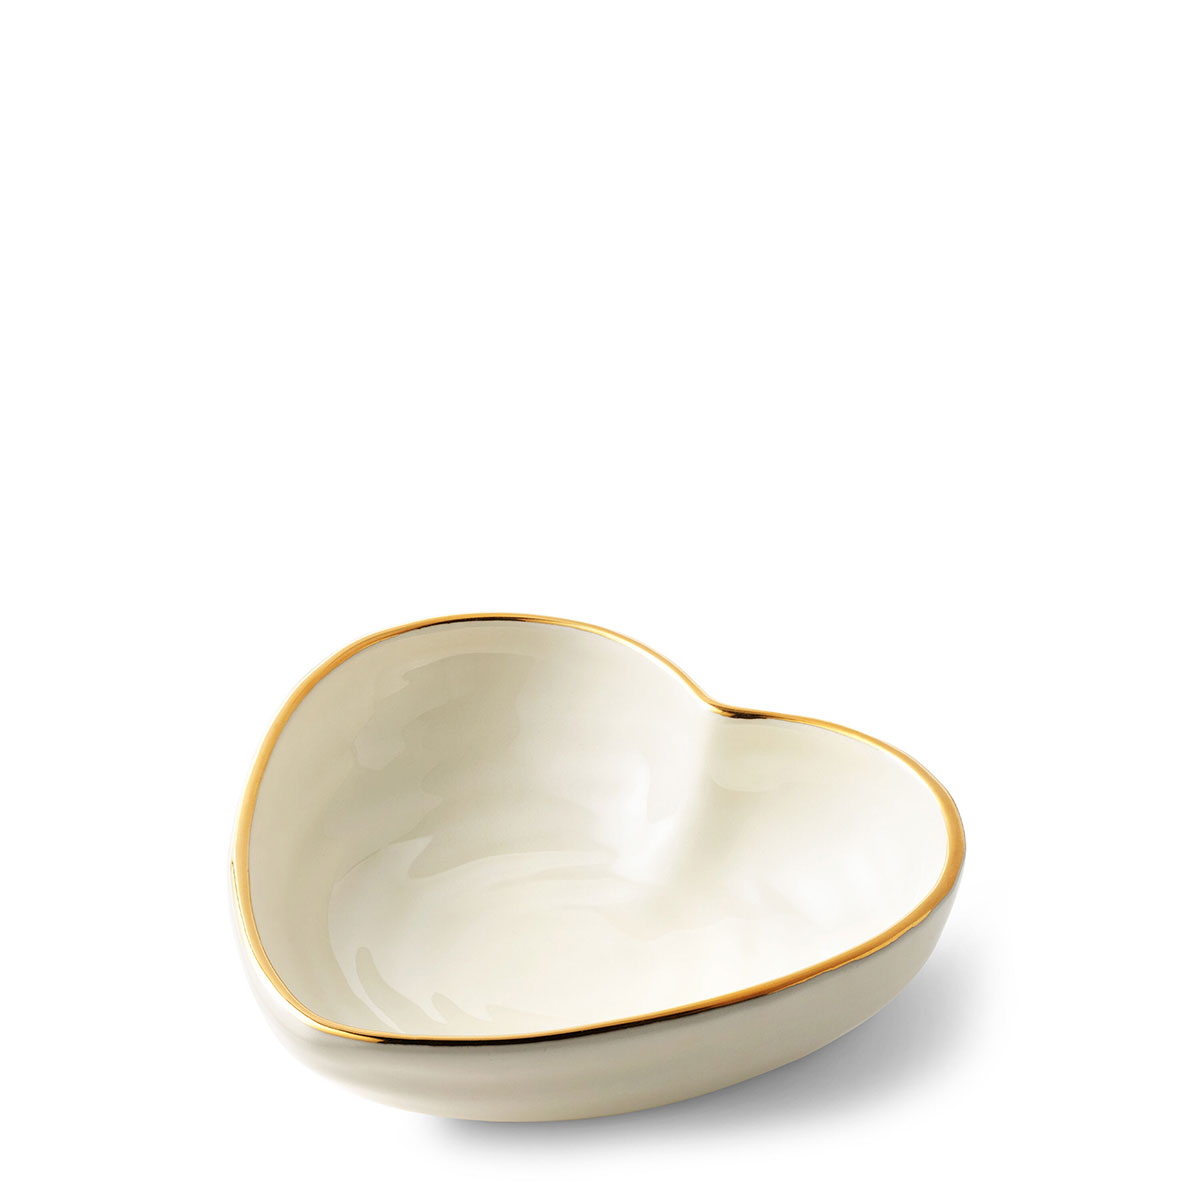 Aerin Ribbed Heart Dish, Cream with gold rim